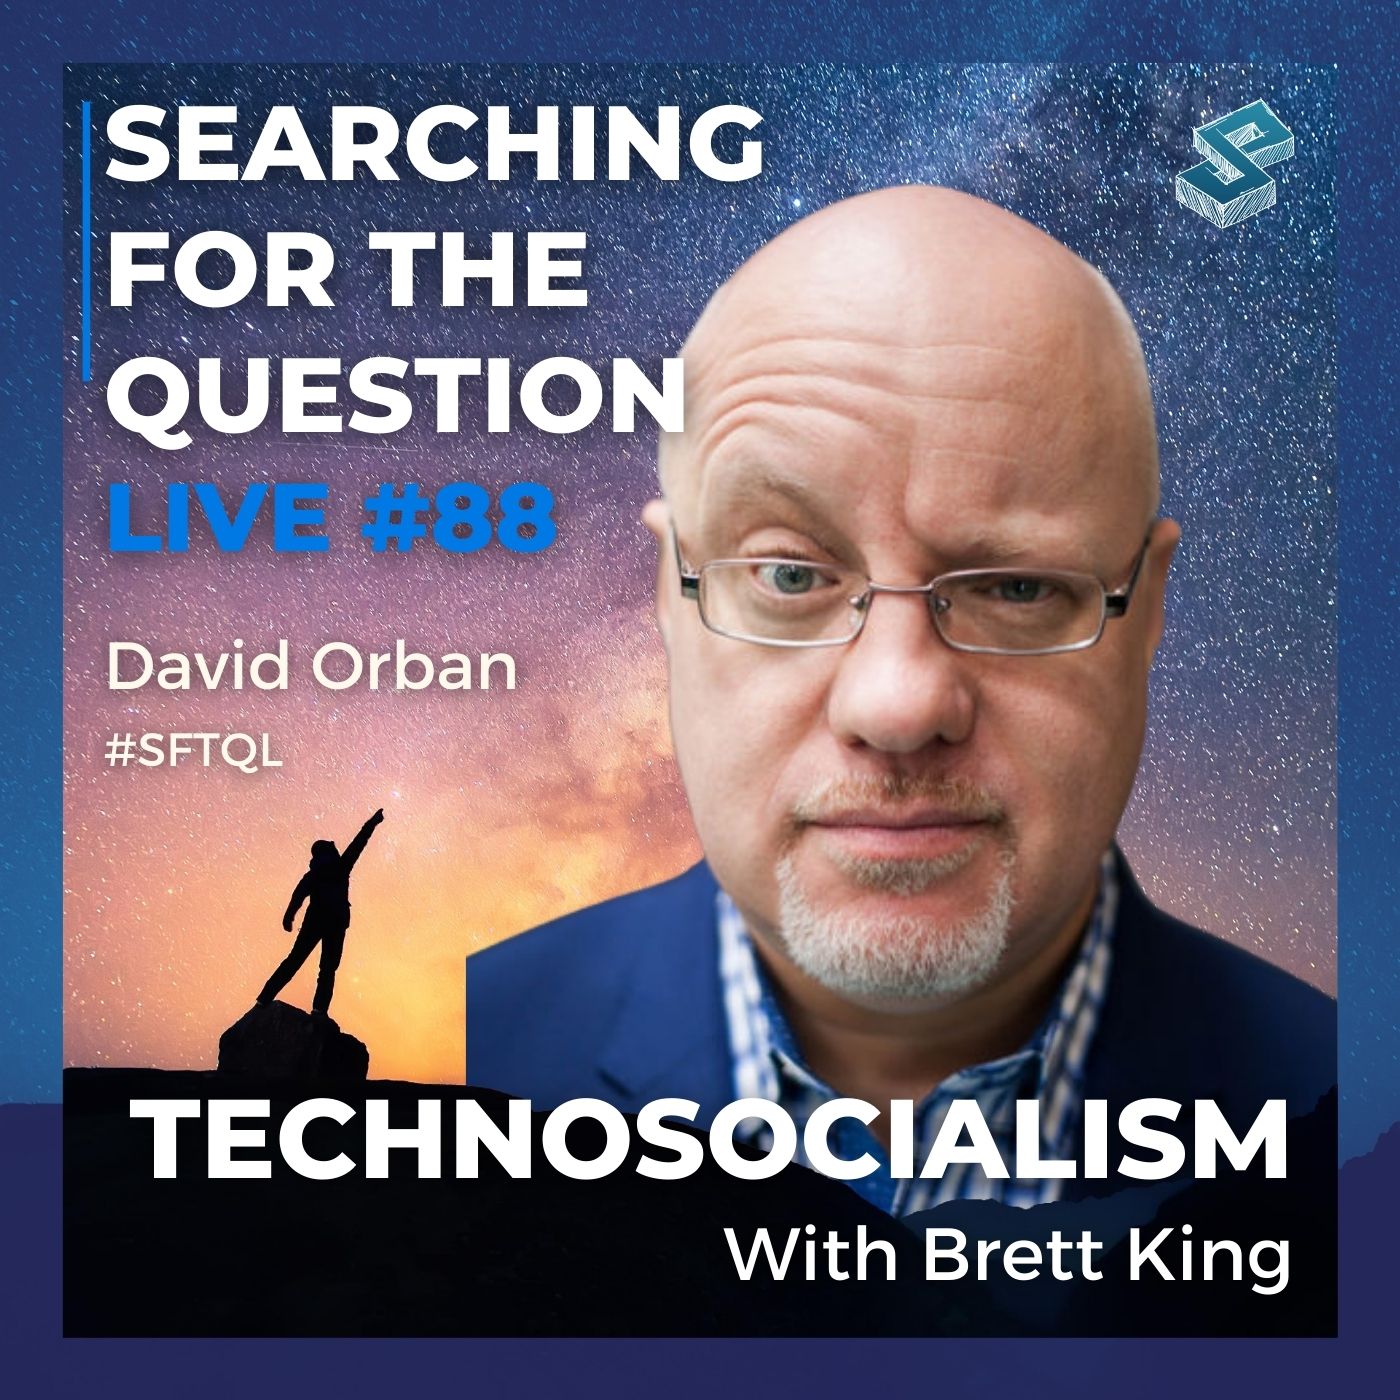 Technosocialism with Brett King - Searching For The Question Live #88